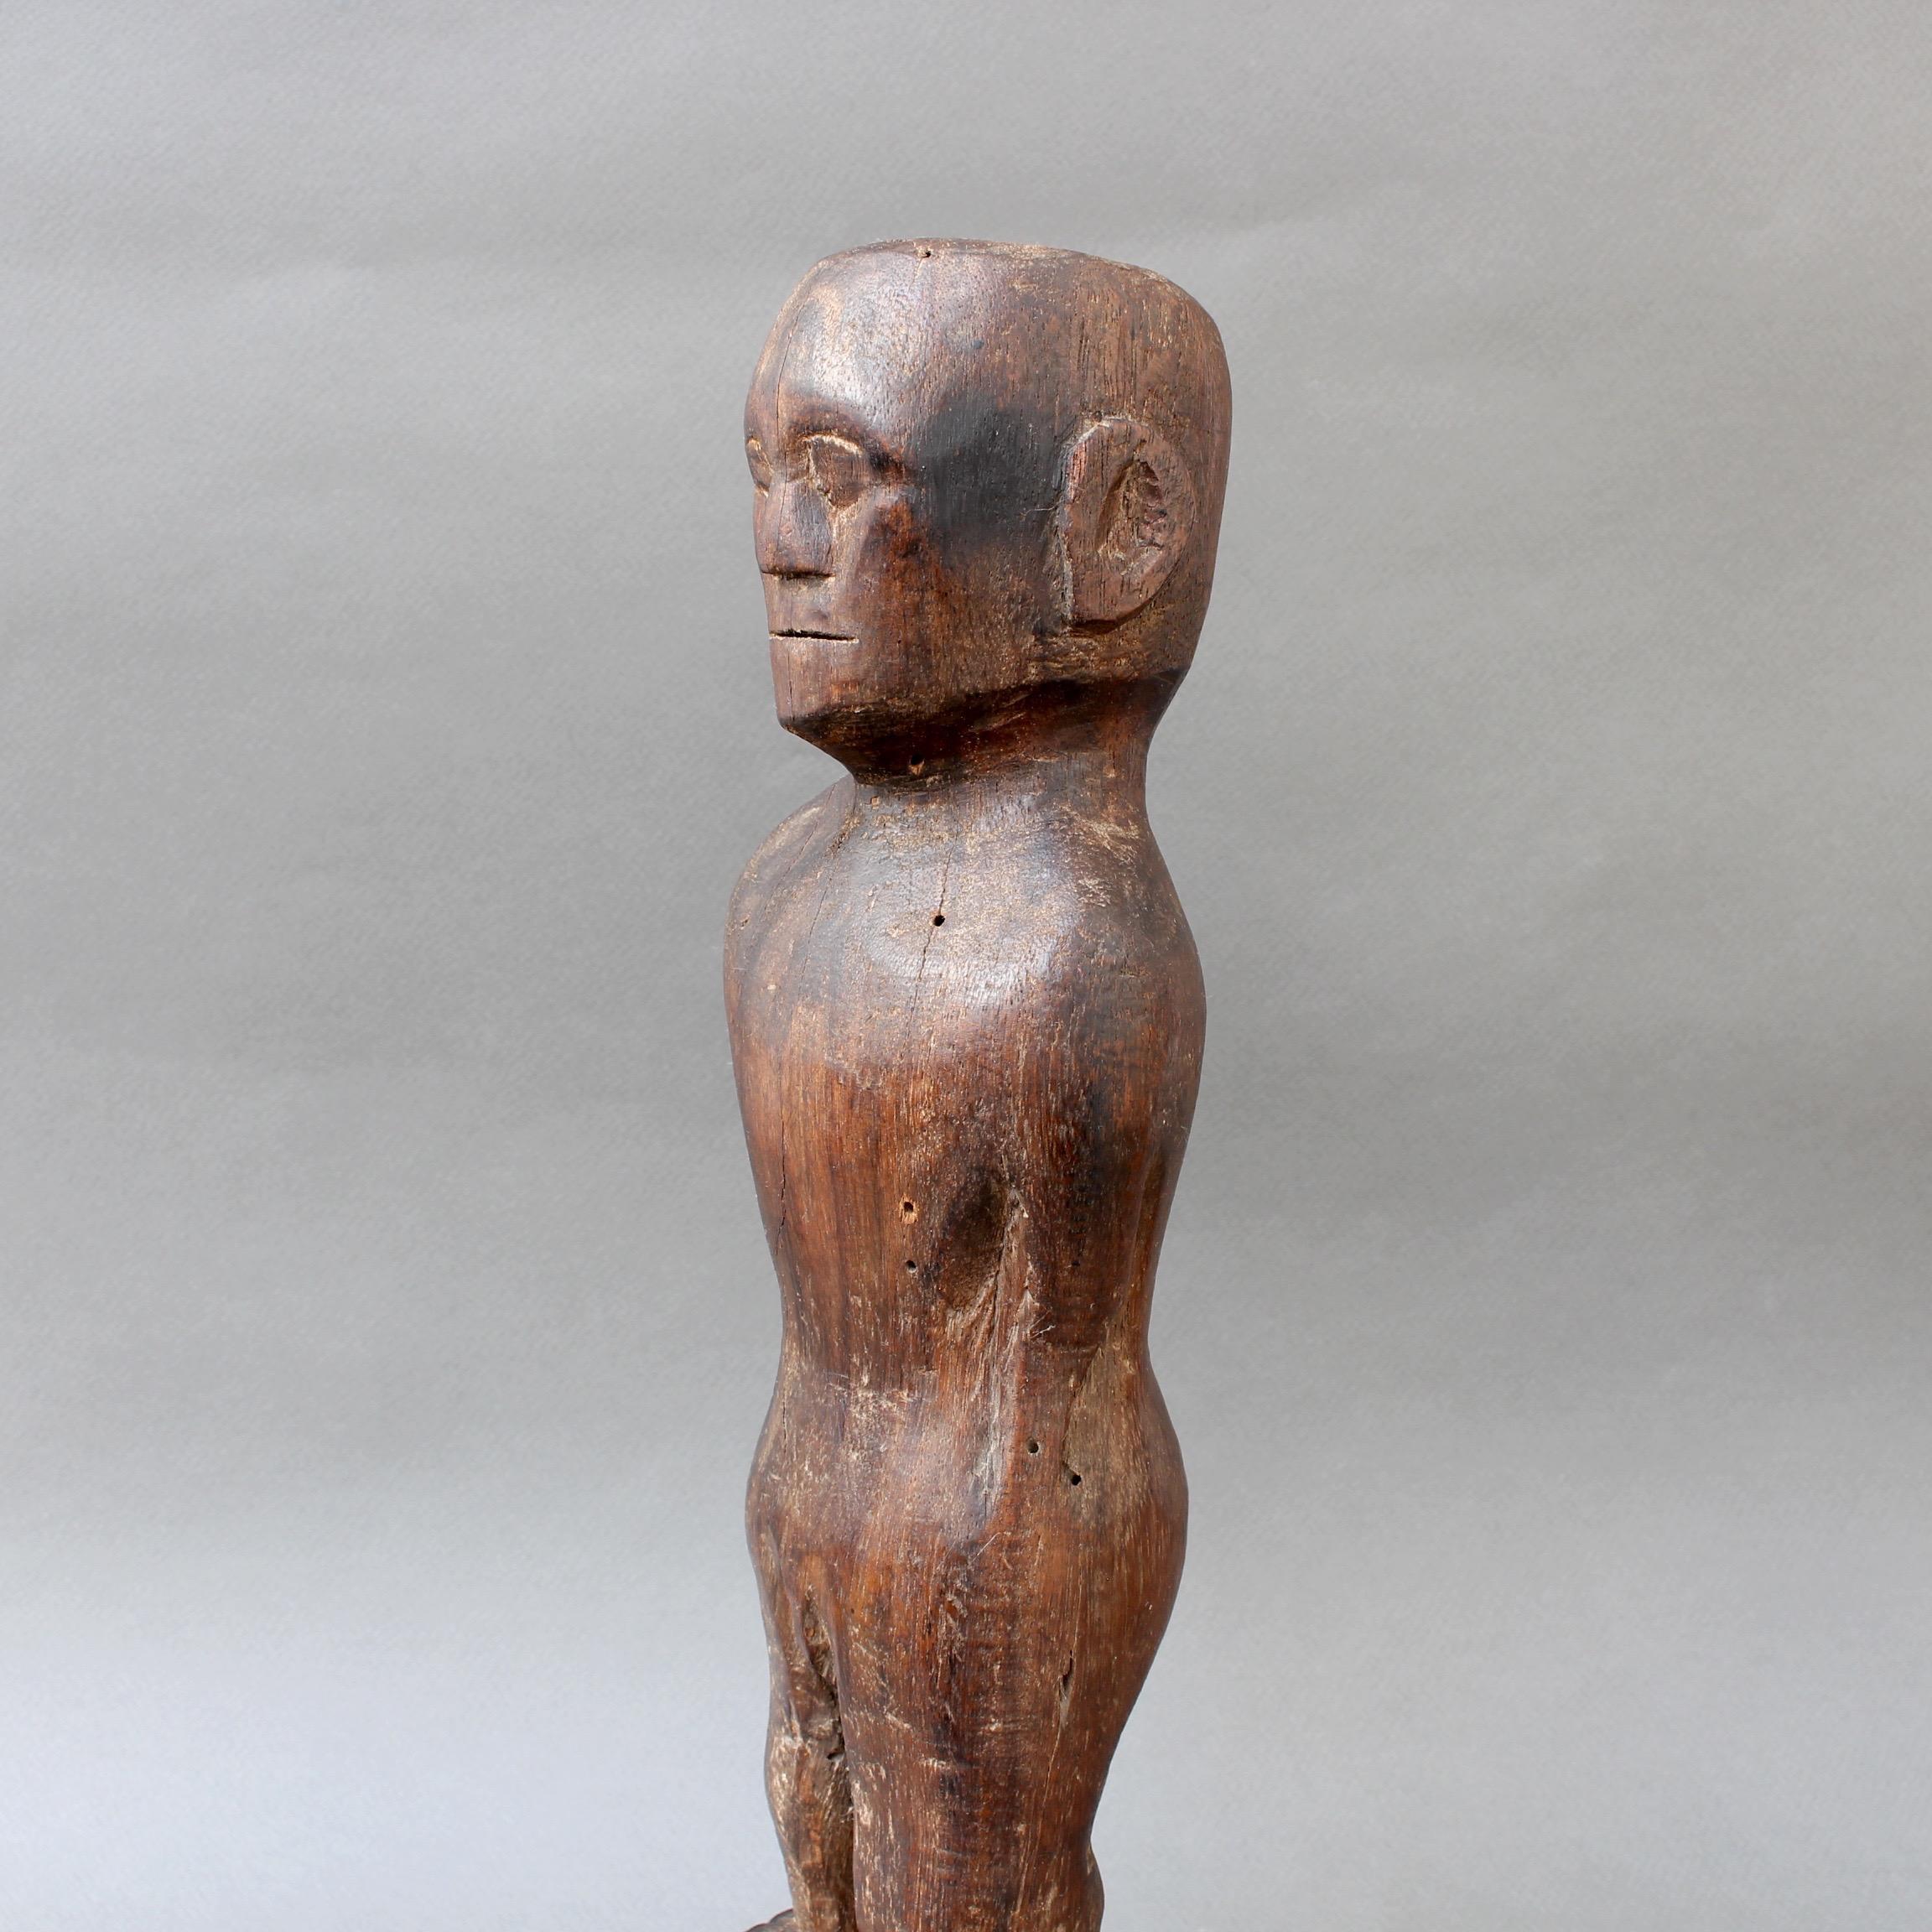 Wooden Carving or Sculpture of Standing Ancestral Figure from Timor, Indonesia 5